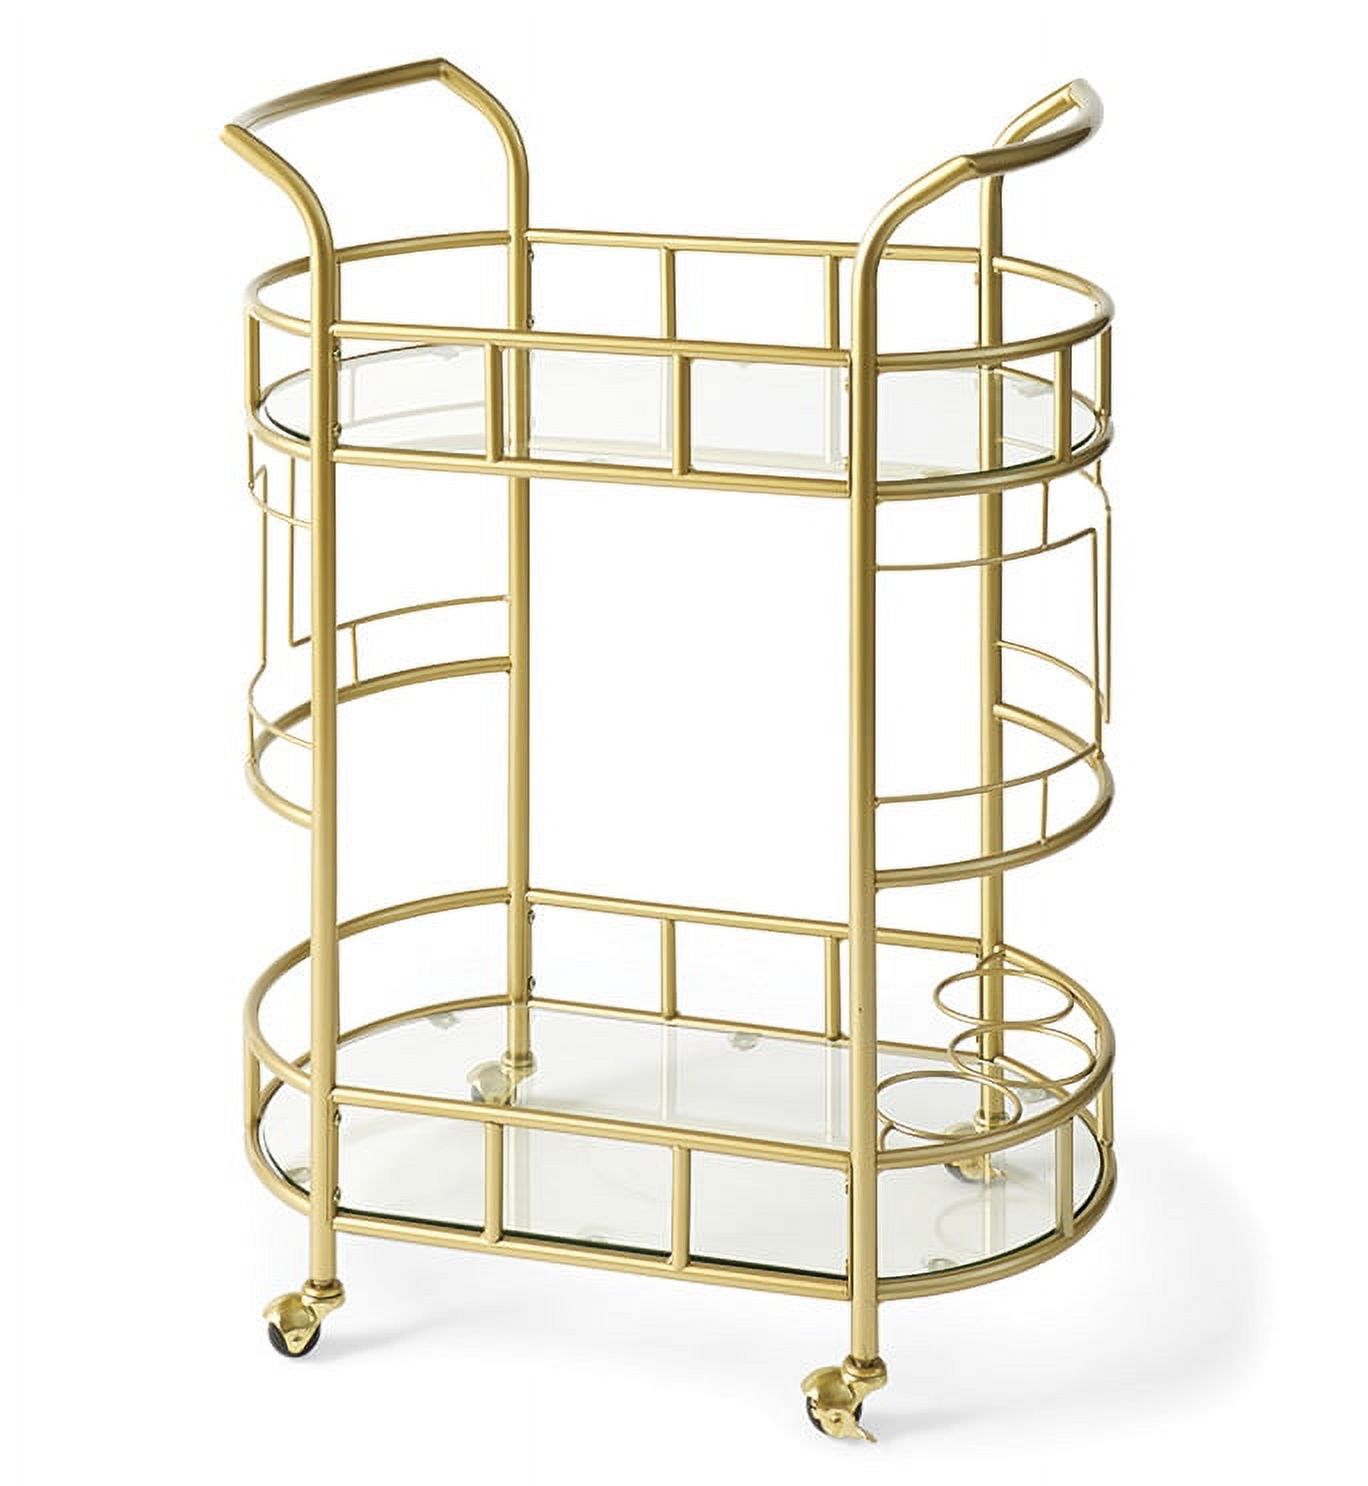 Better Homes & Gardens Fitzgerald Bar Cart with Matte Gold Metal Finish, 2-Tiers - image 3 of 10